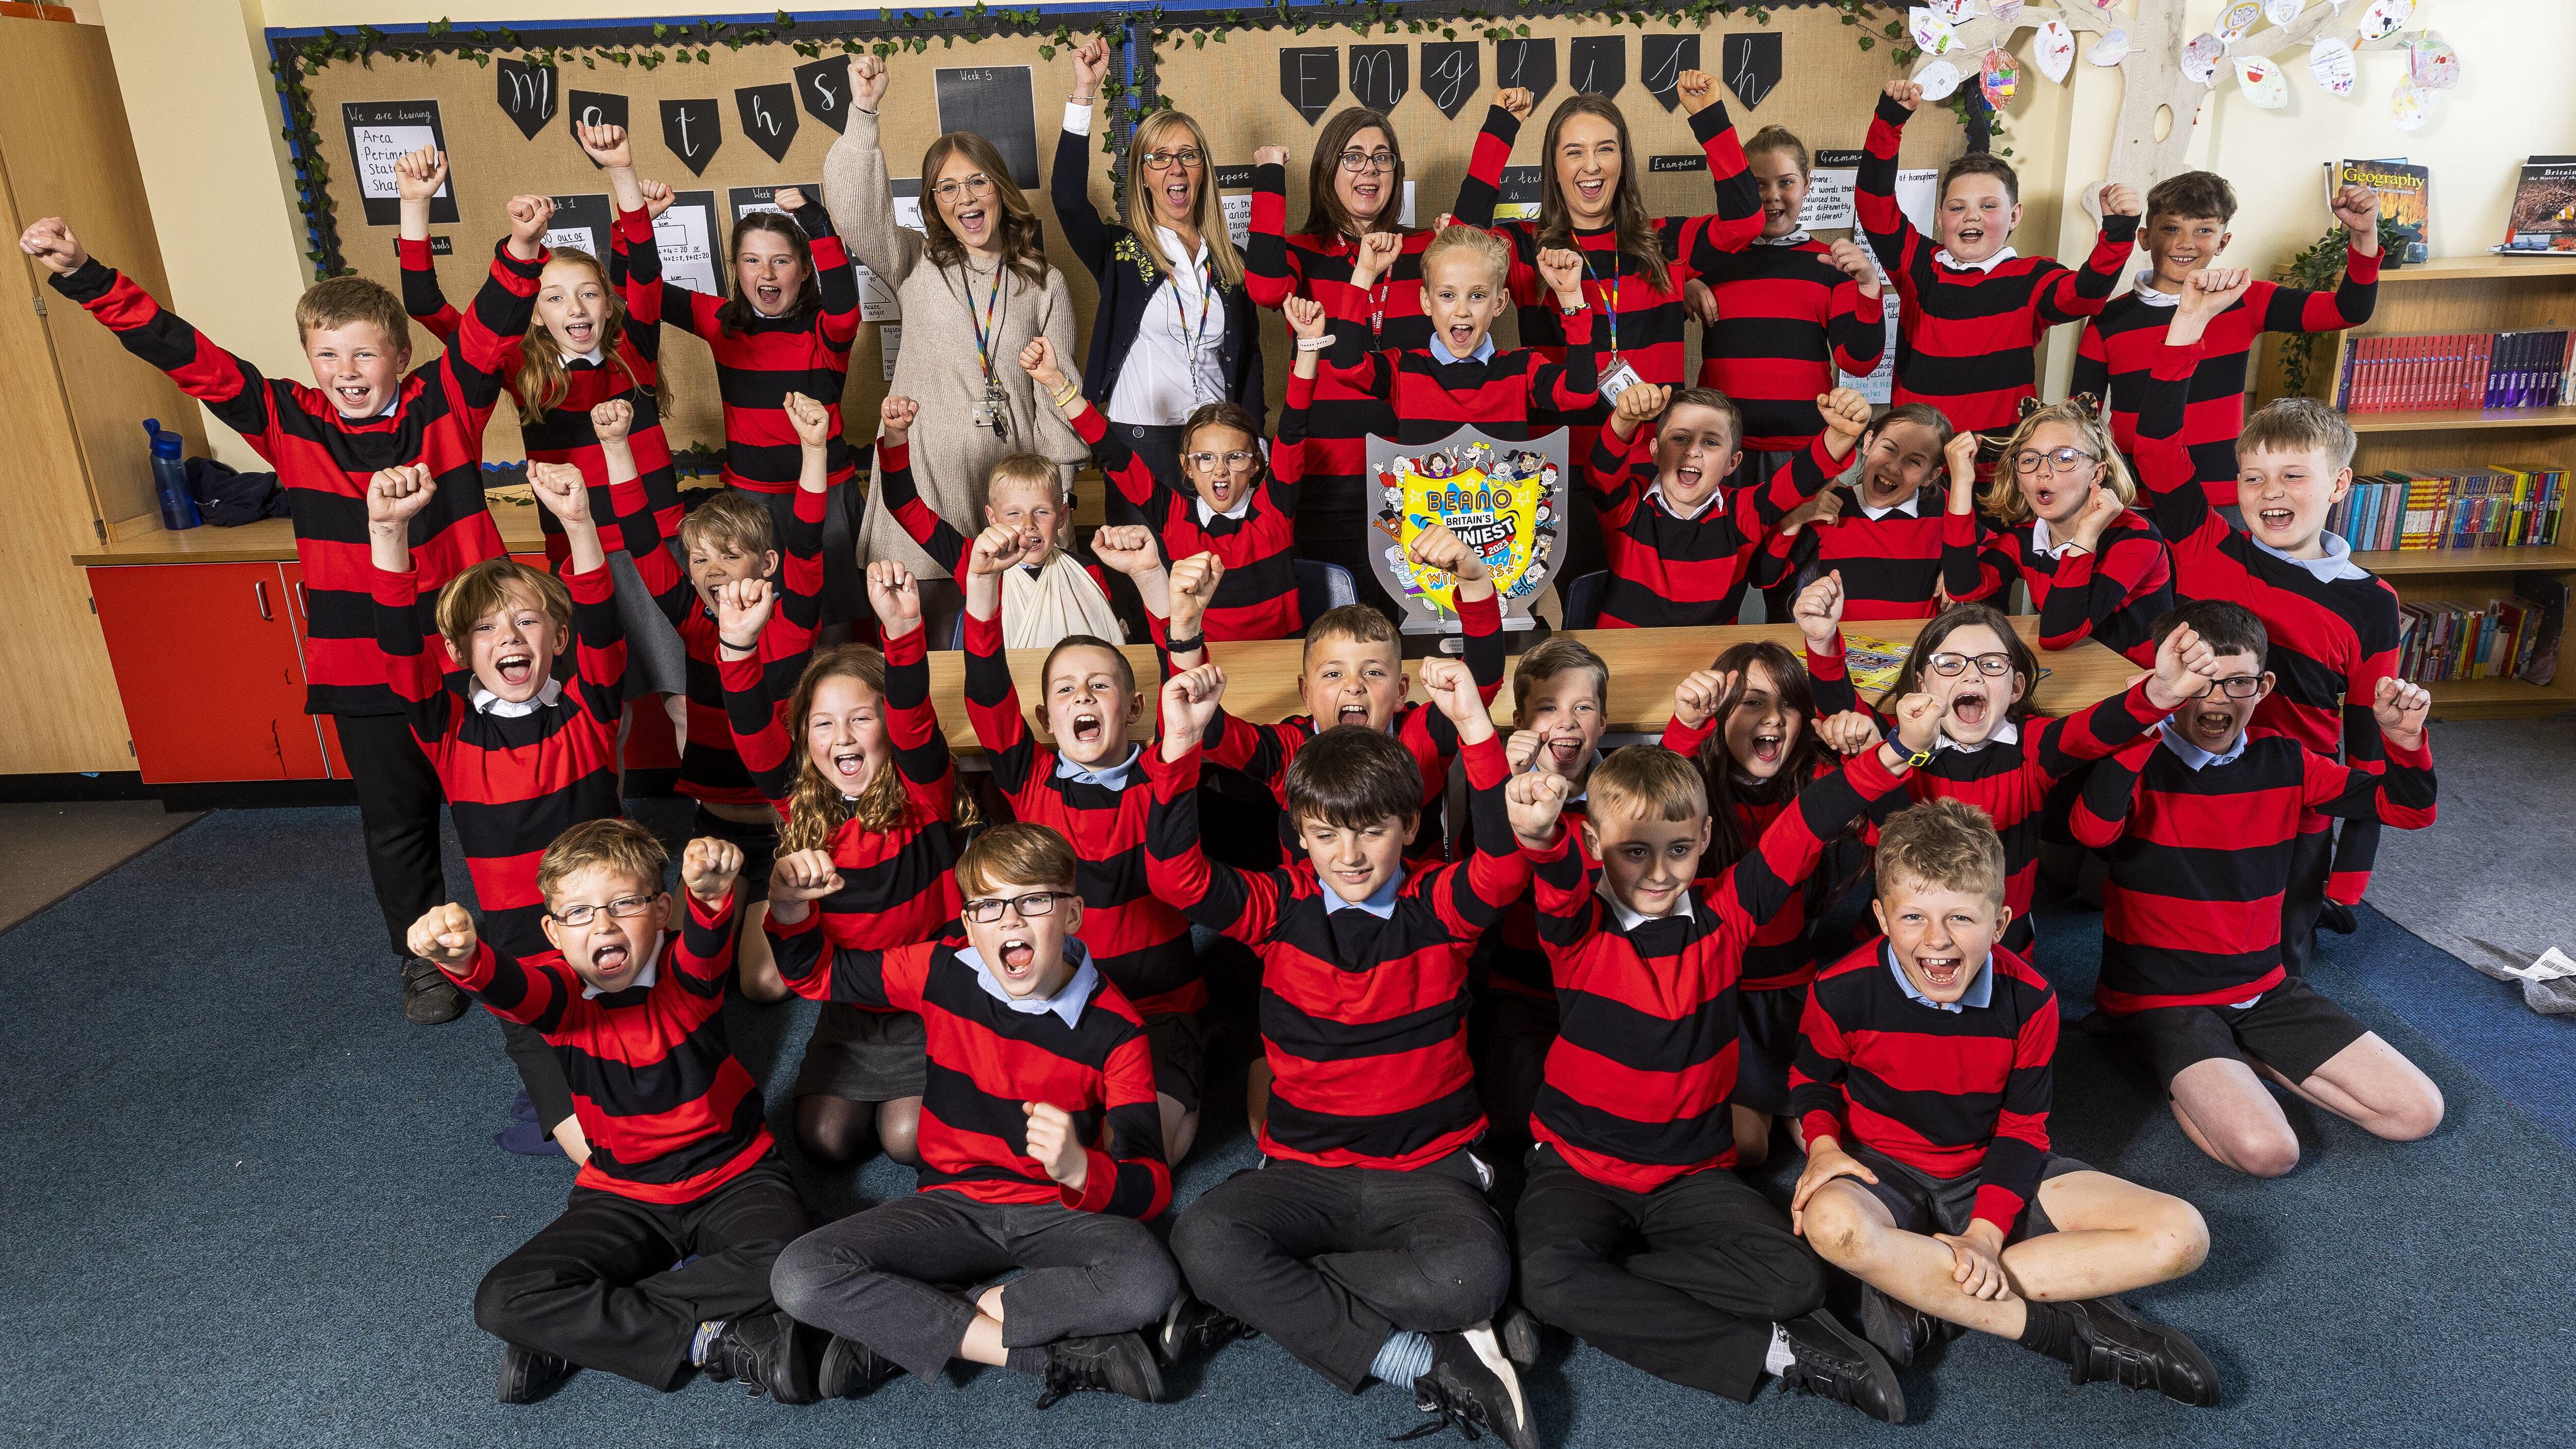 The pupils experienced an ‘extraordinary, one-of-a-kind moment’ after winning the Beano’s Britain’s Funniest Class competition.